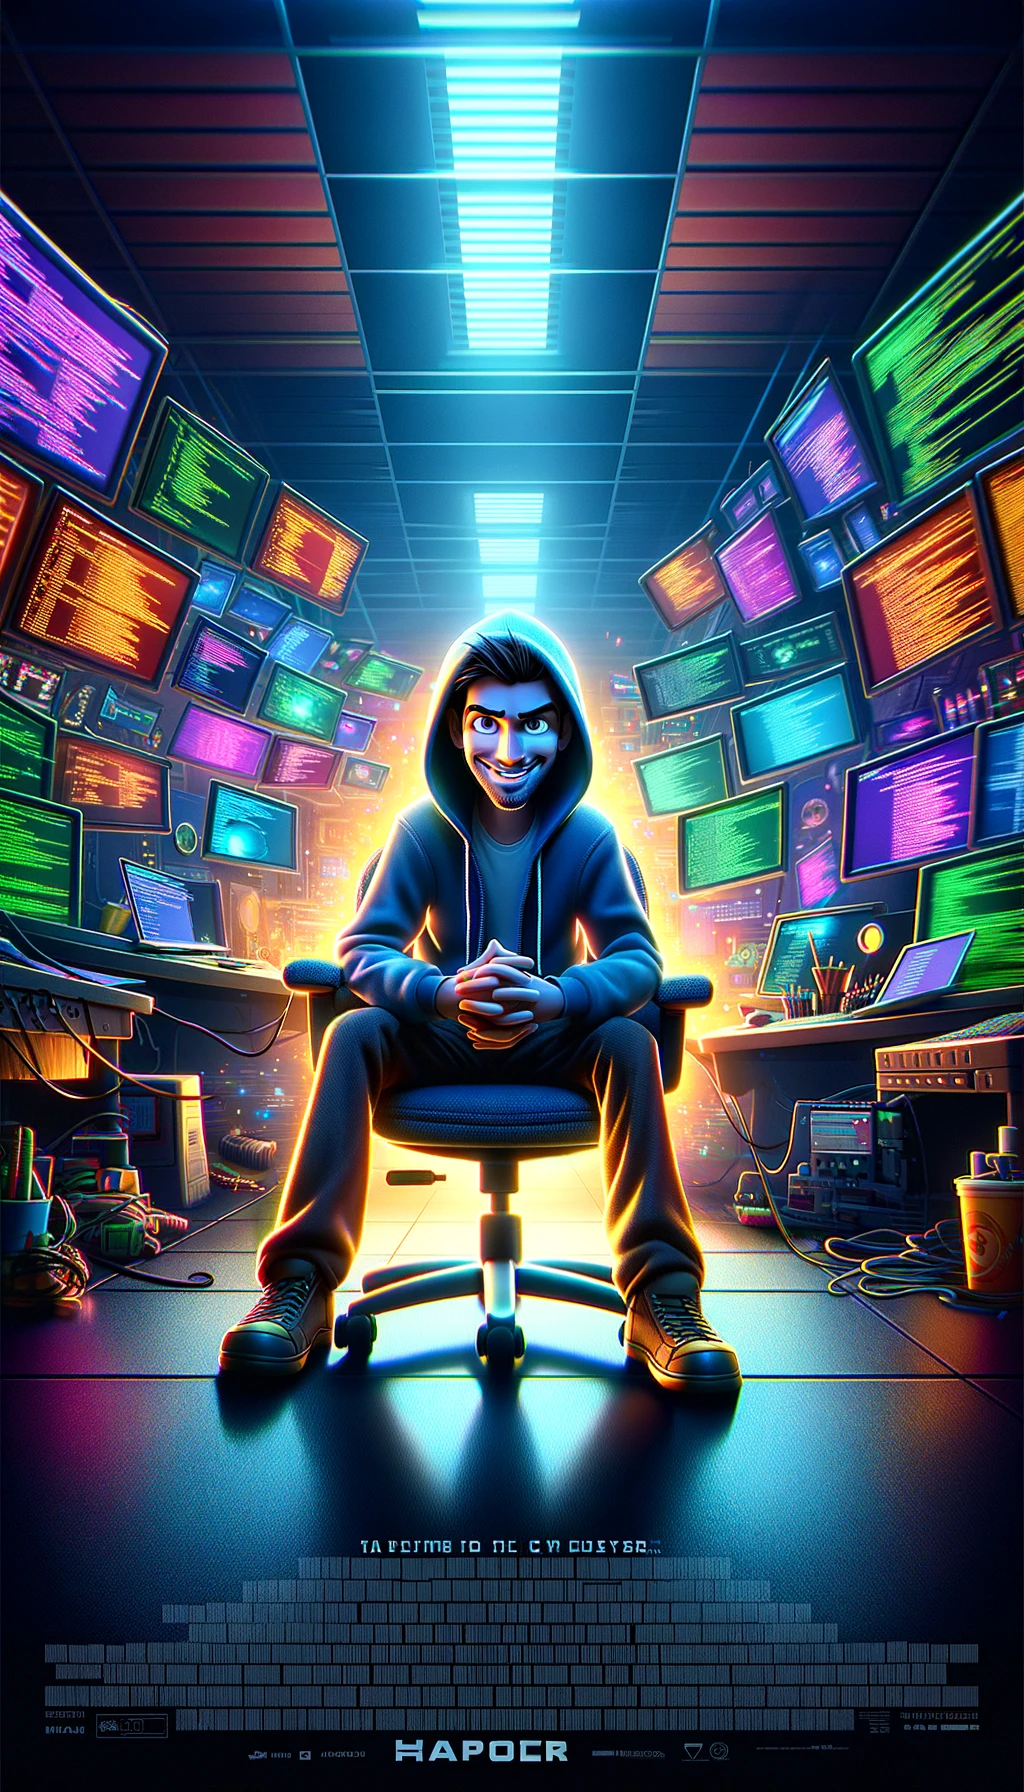 An animated movie poster in Pixar style, portraying a hacker as a heroic figure. The hacker is represented with a charismatic, mischievous smile, sitting in a high-tech chair surrounded by multiple colorful screens displaying code and cyber graphics. The hacker wears a casual hoodie and has tools of the trade scattered around. The setting gives a vibe of a secret hideout, with dynamic lighting emphasizing the thrill of hacking. The poster's title is in a futuristic font, adding to the cyber adventure theme.